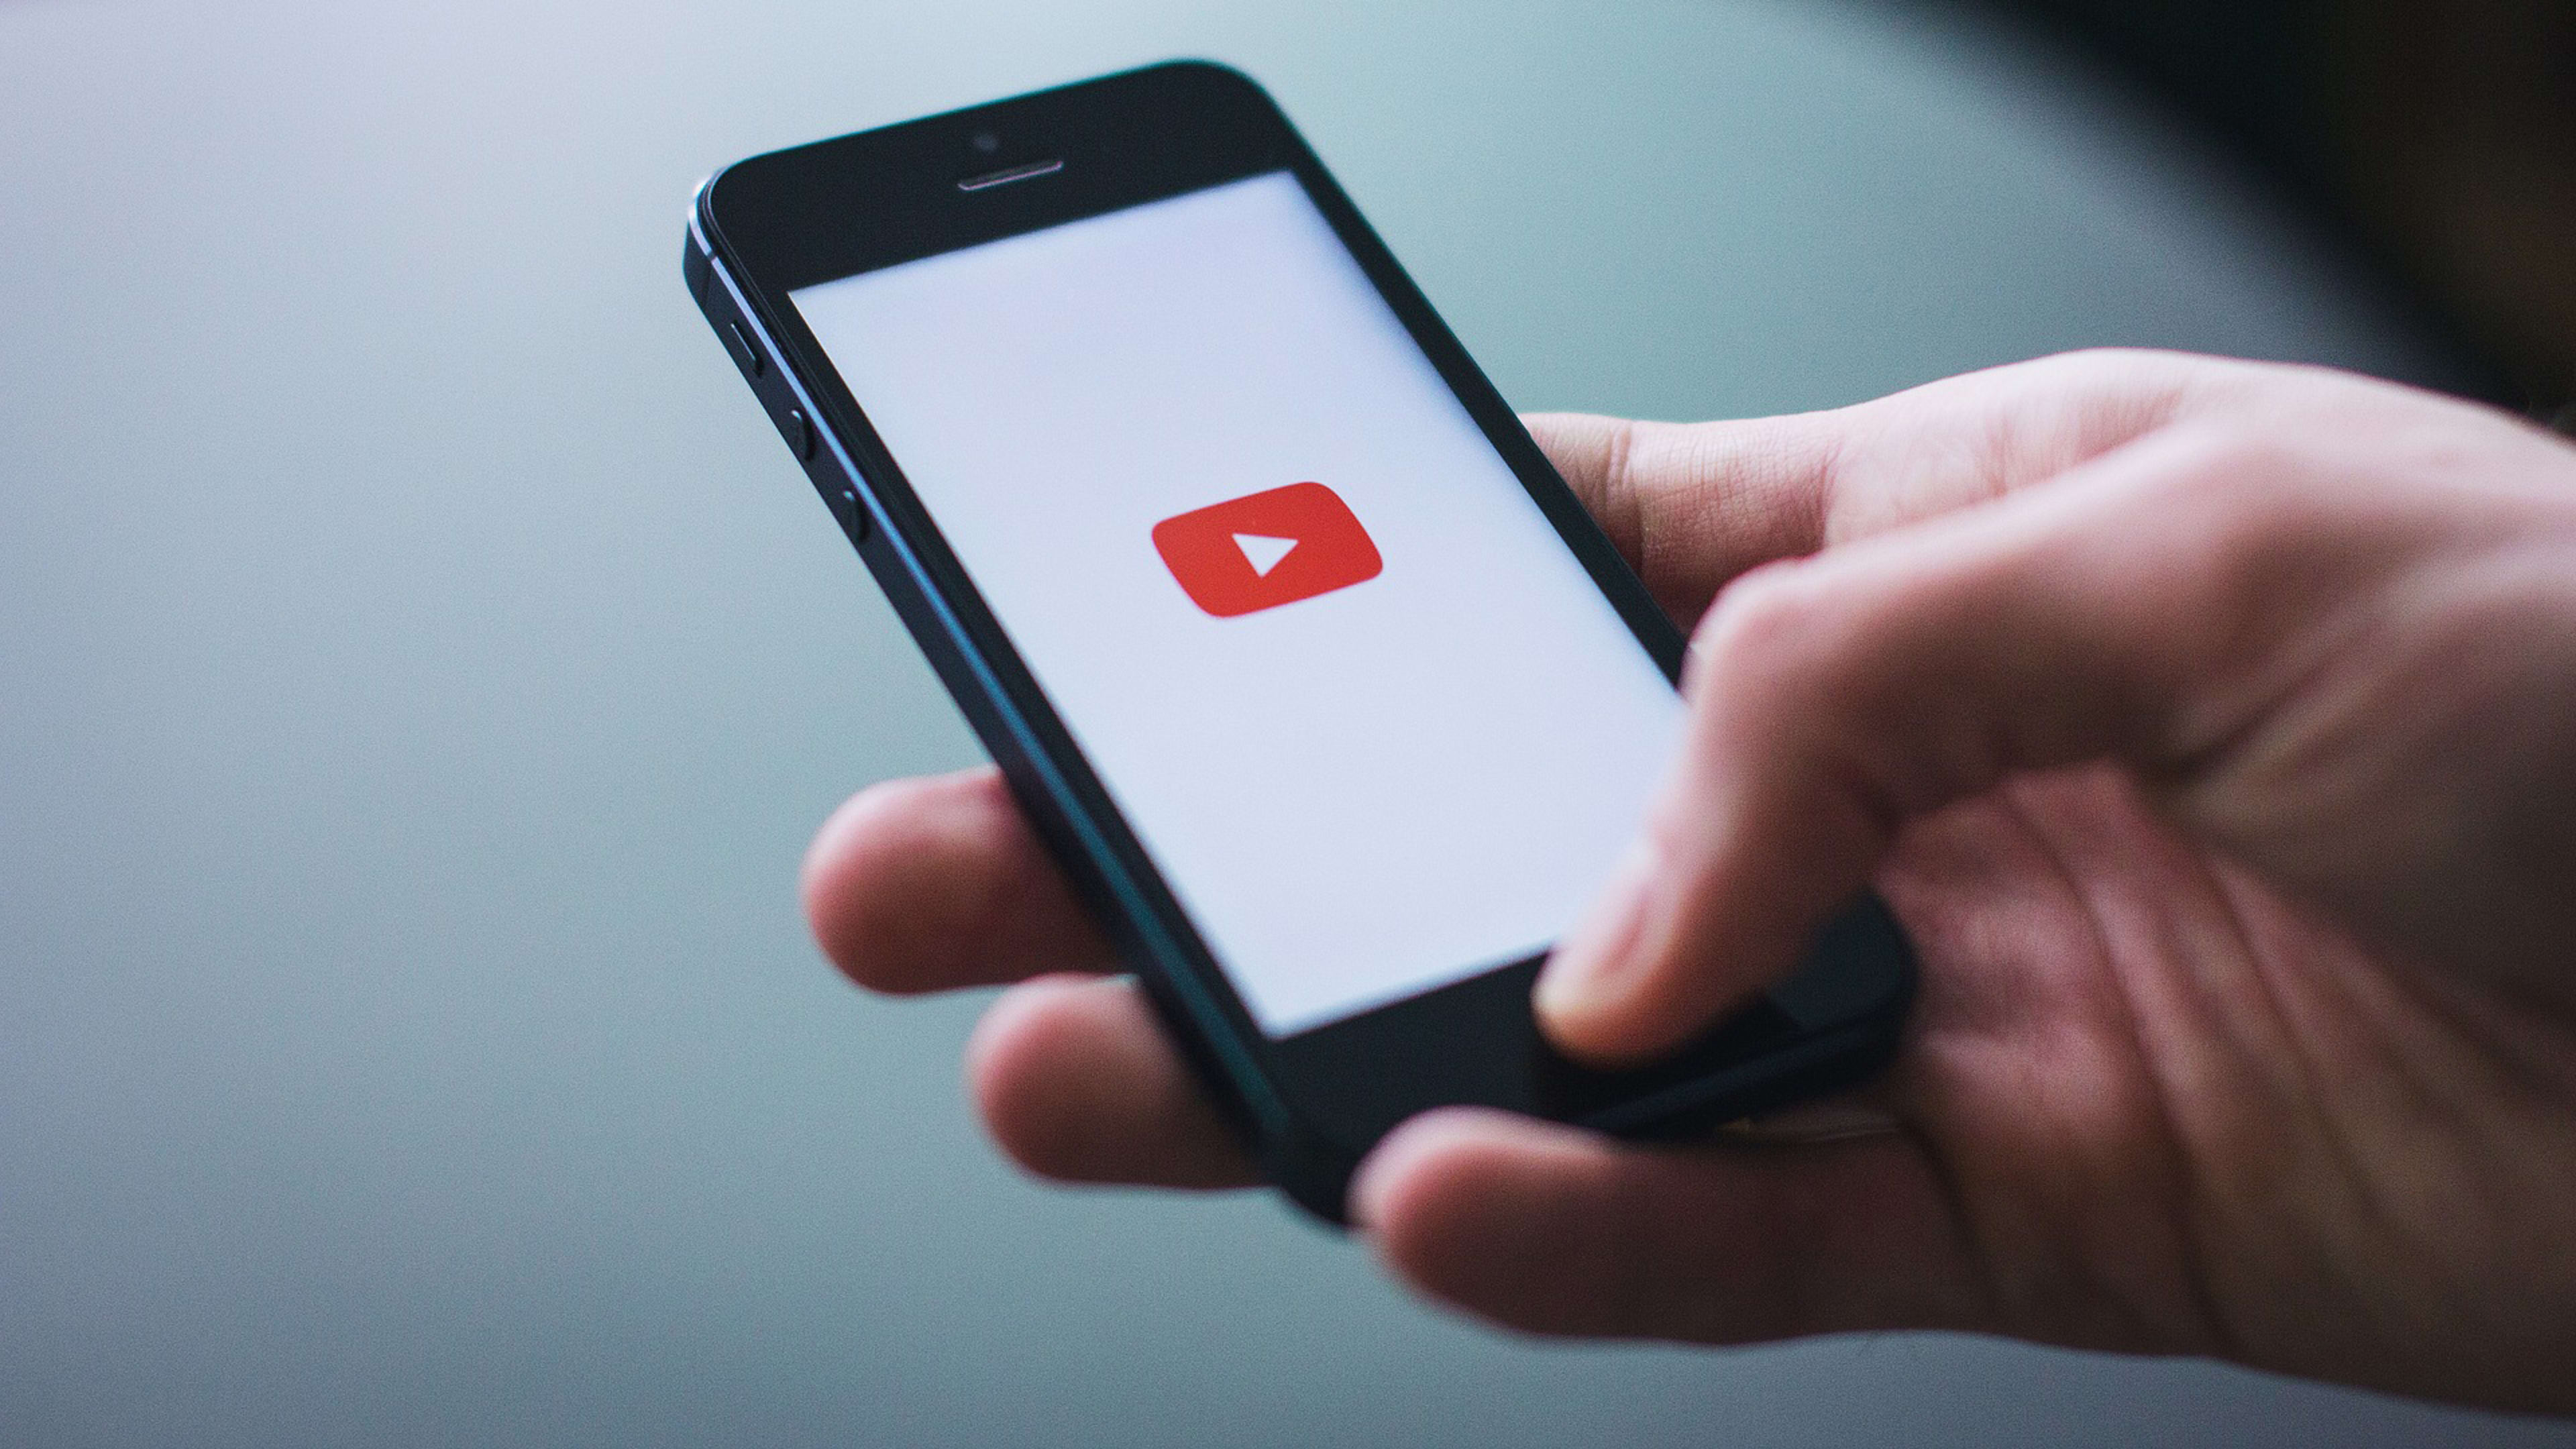 YouTube is now the iPhone’s top grossing app in the U.S.